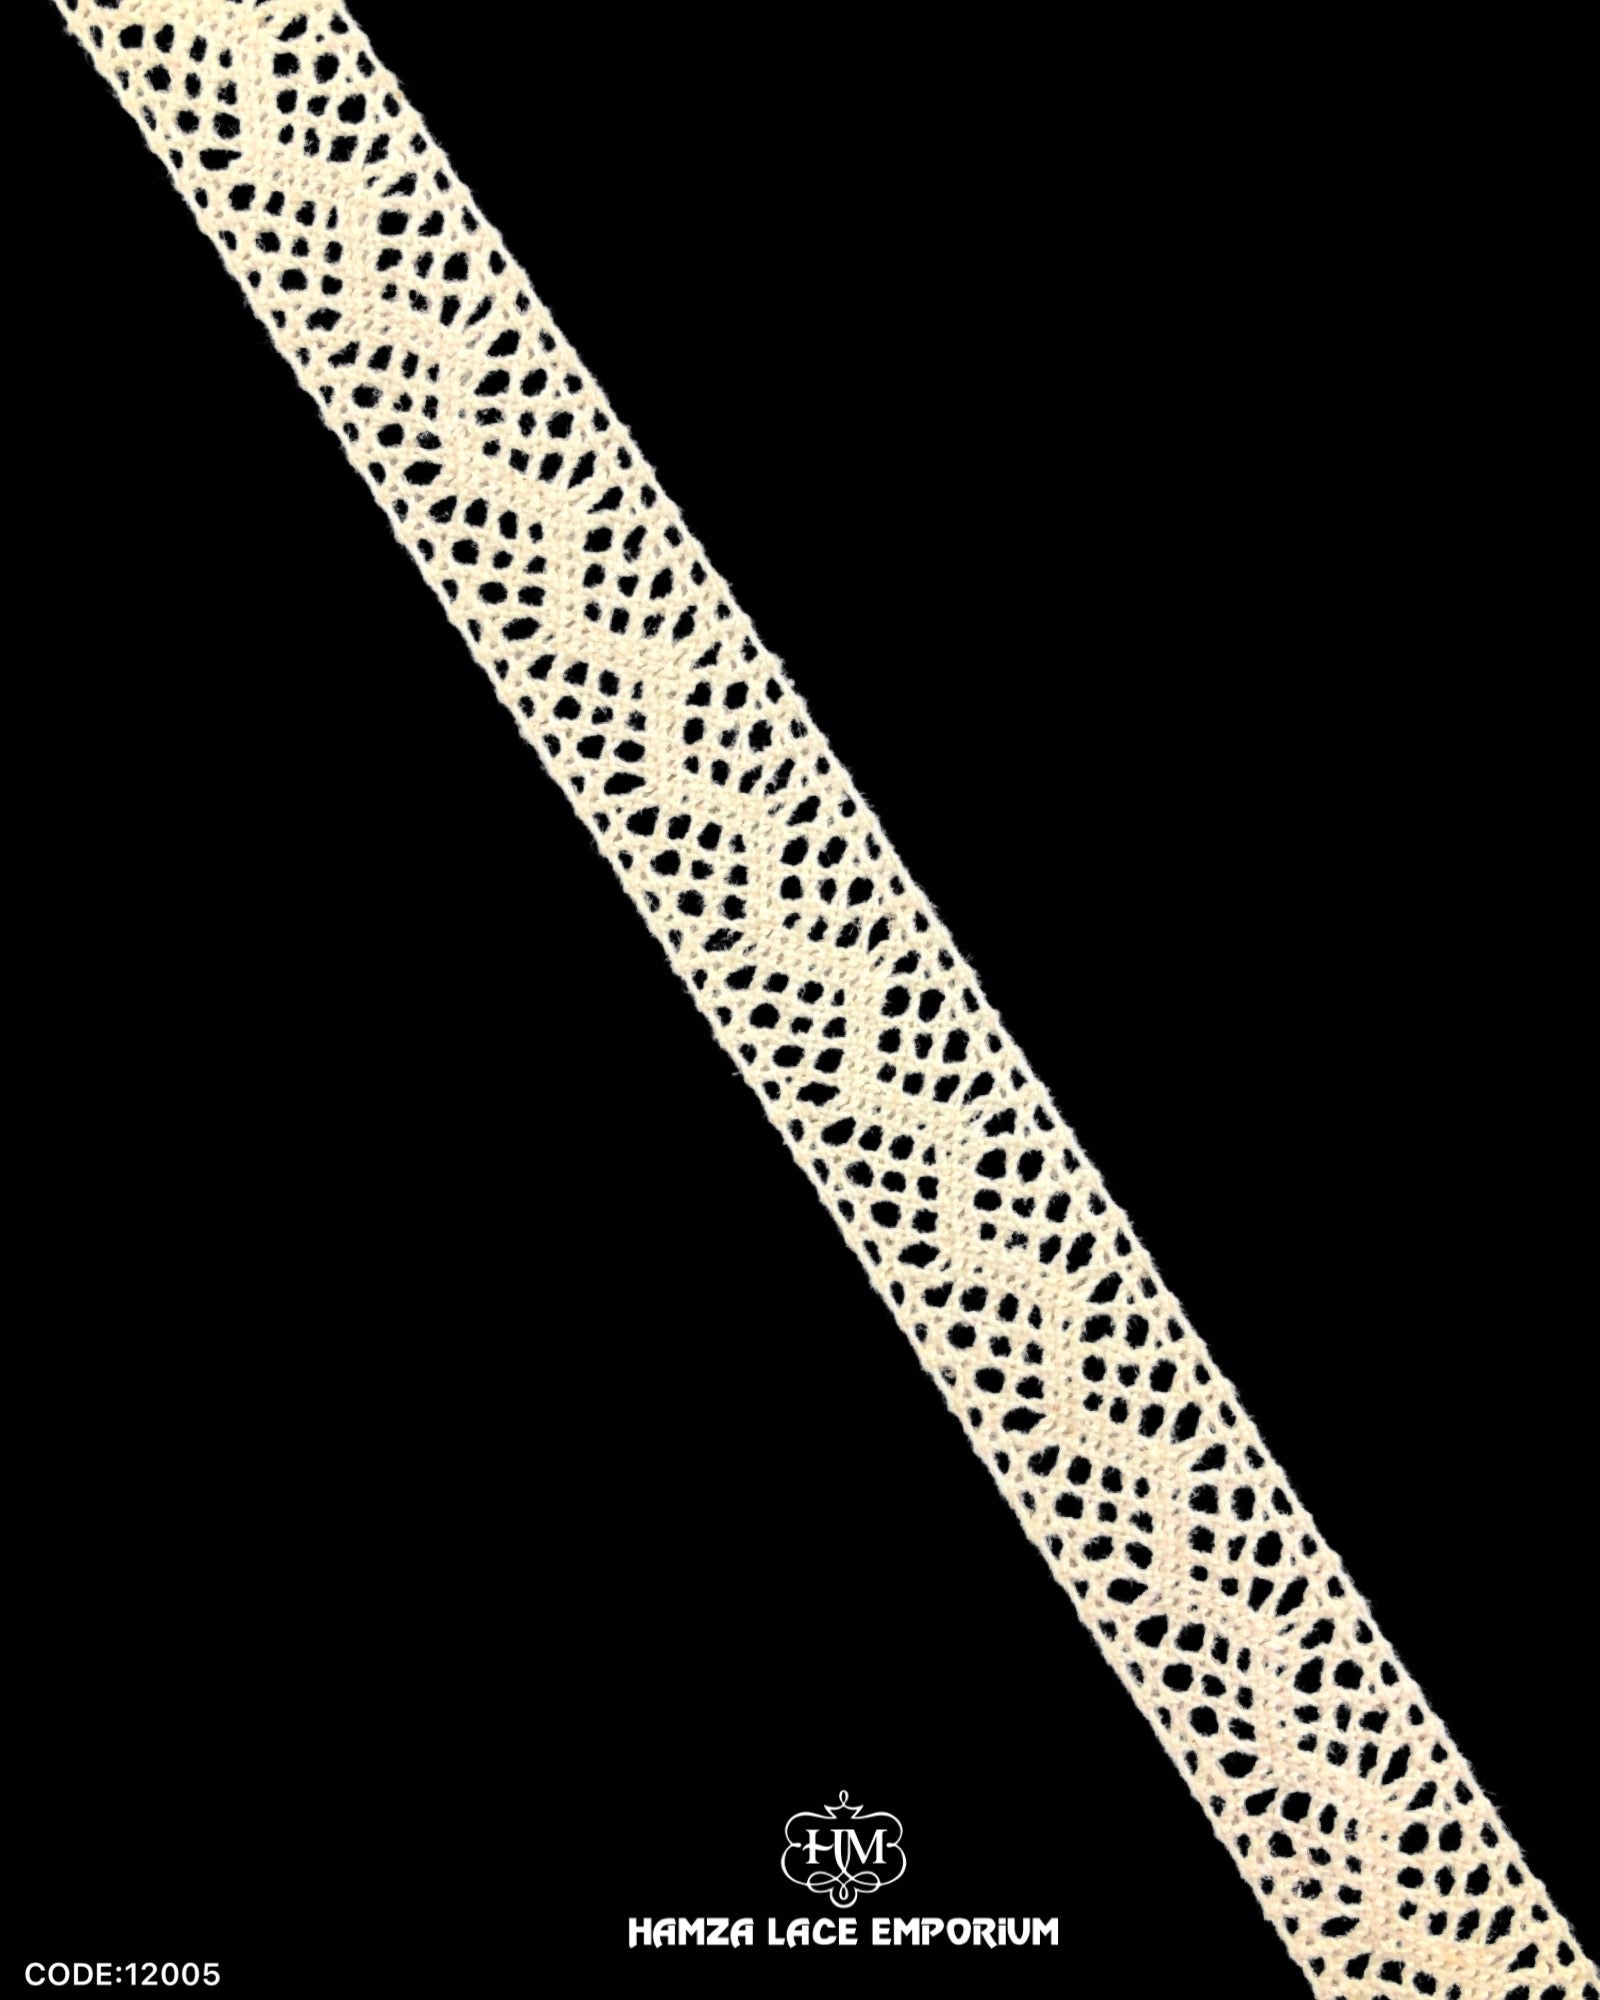 'Center Filling Crochet Lace 12005' with the brand name 'Hamza Lace' written at the bottom